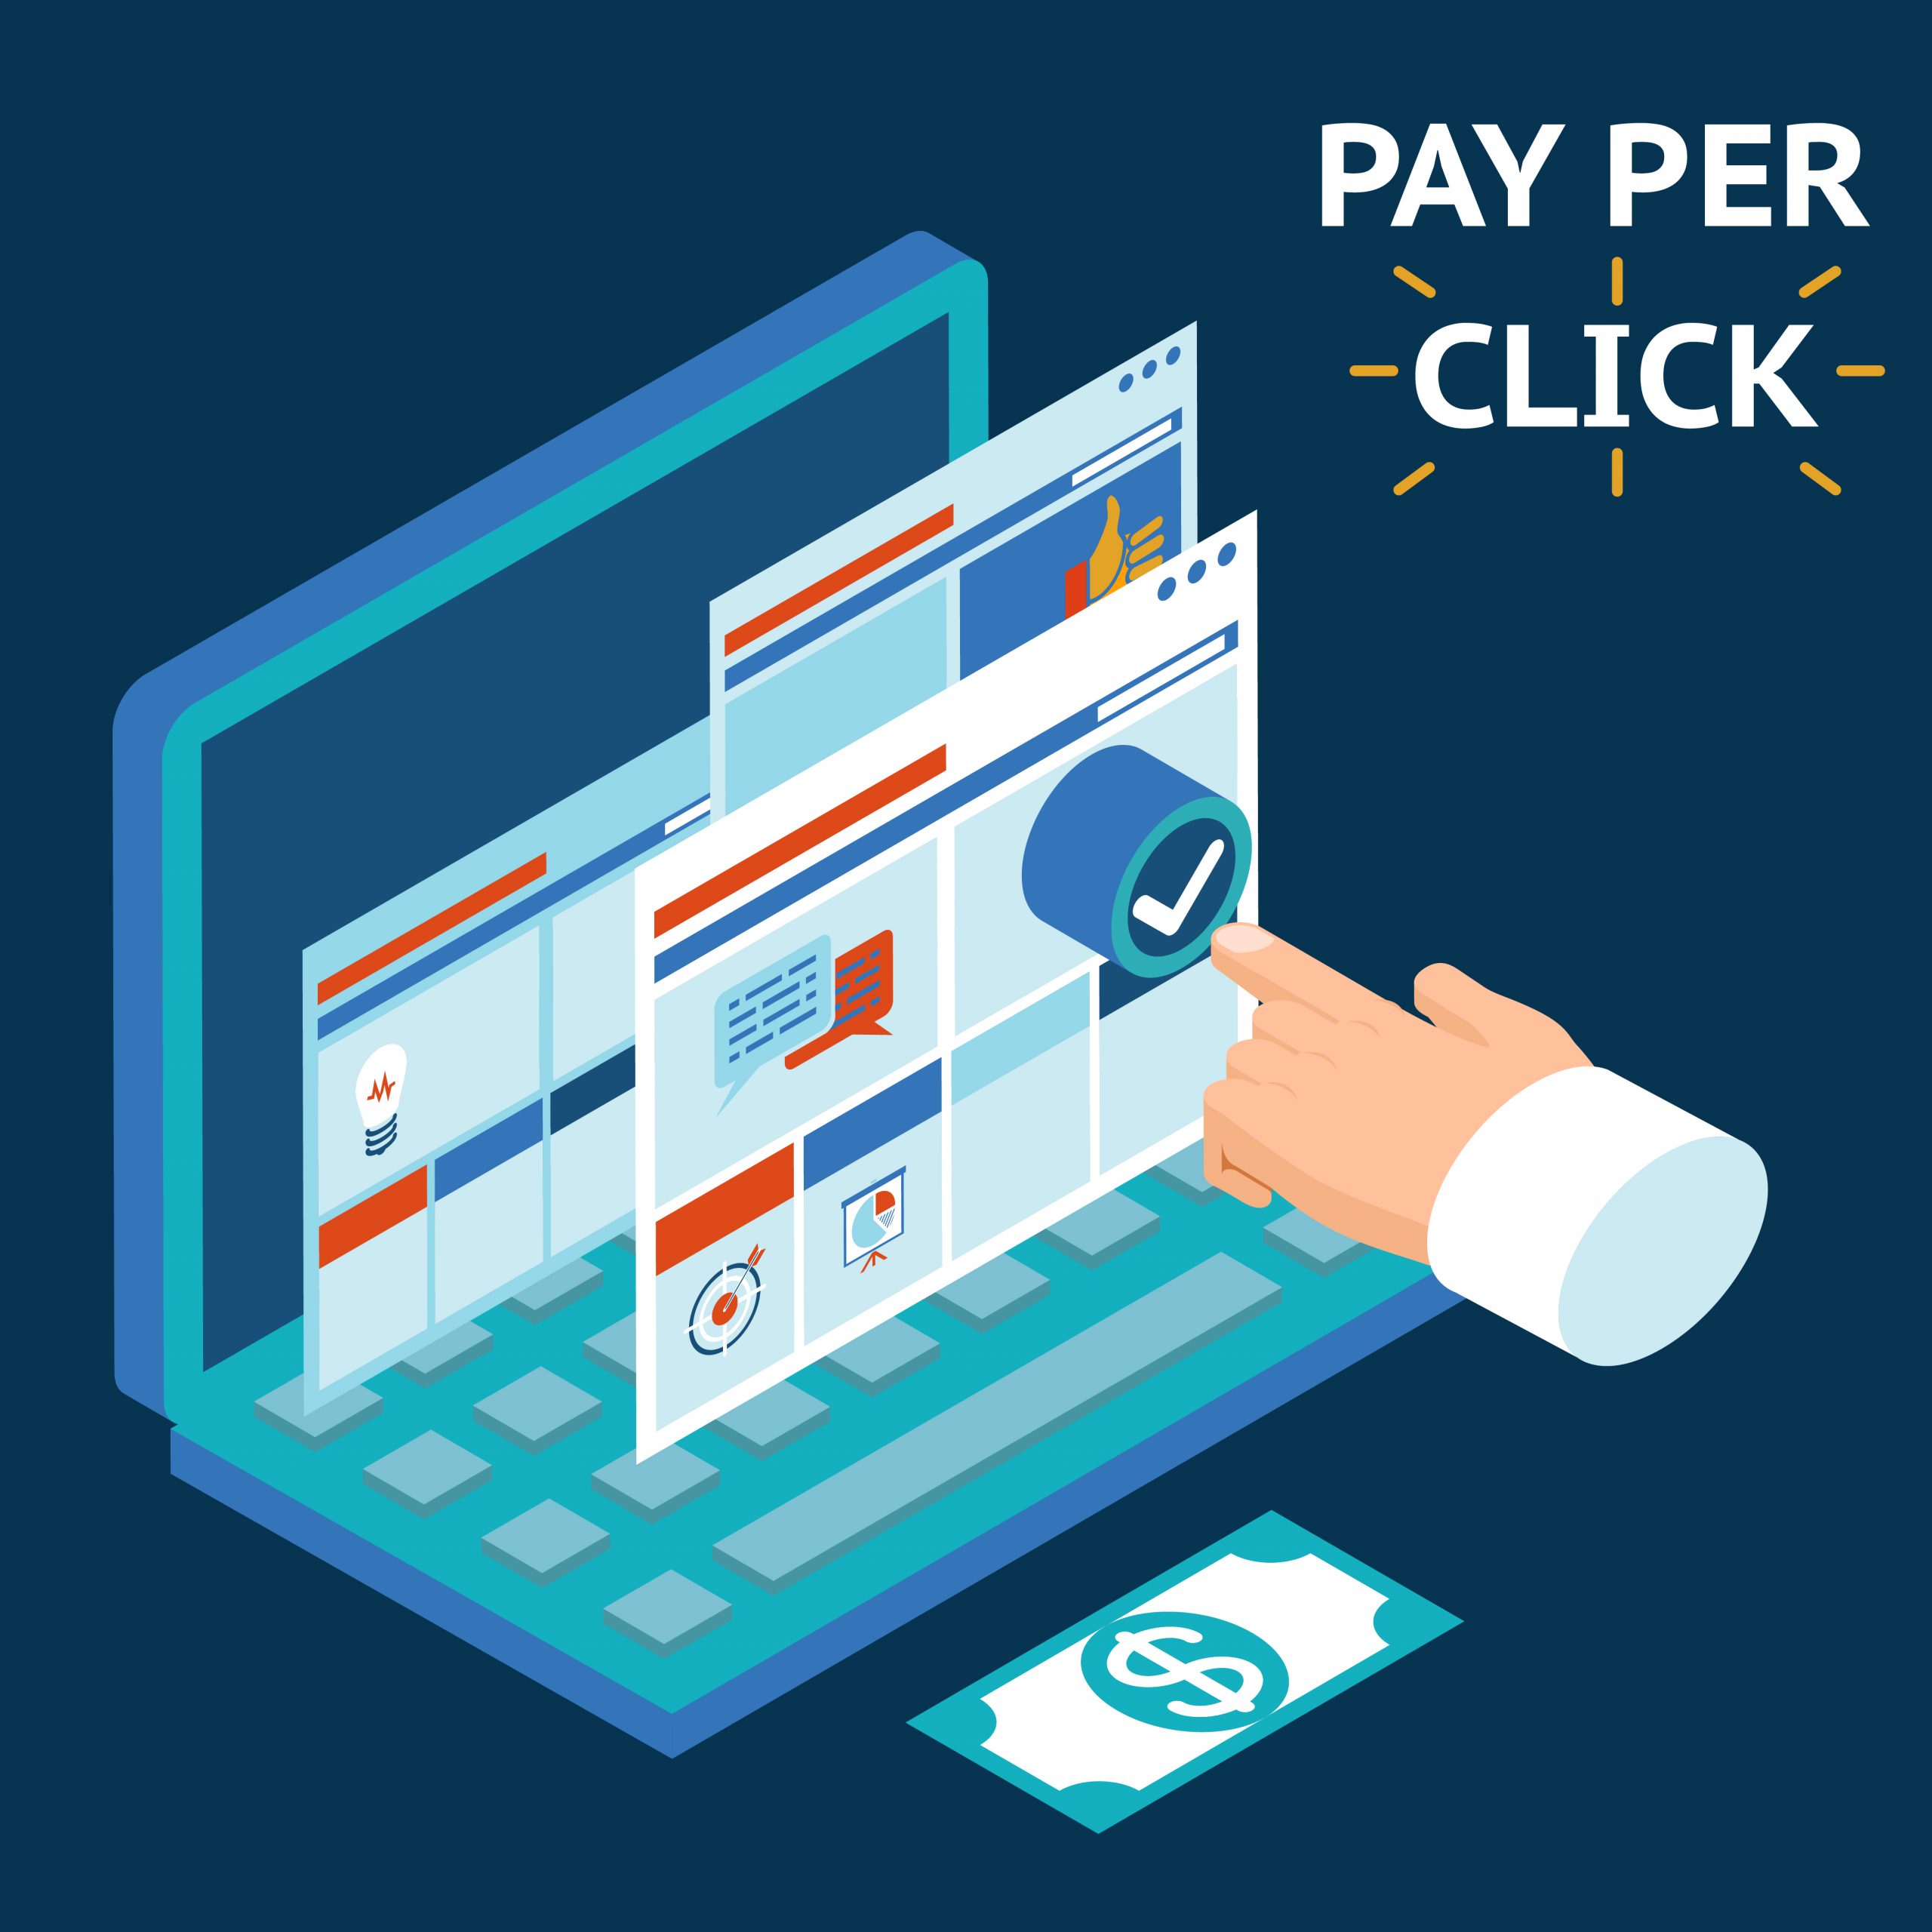 Everything you need to know about Pay Per Click Advertising